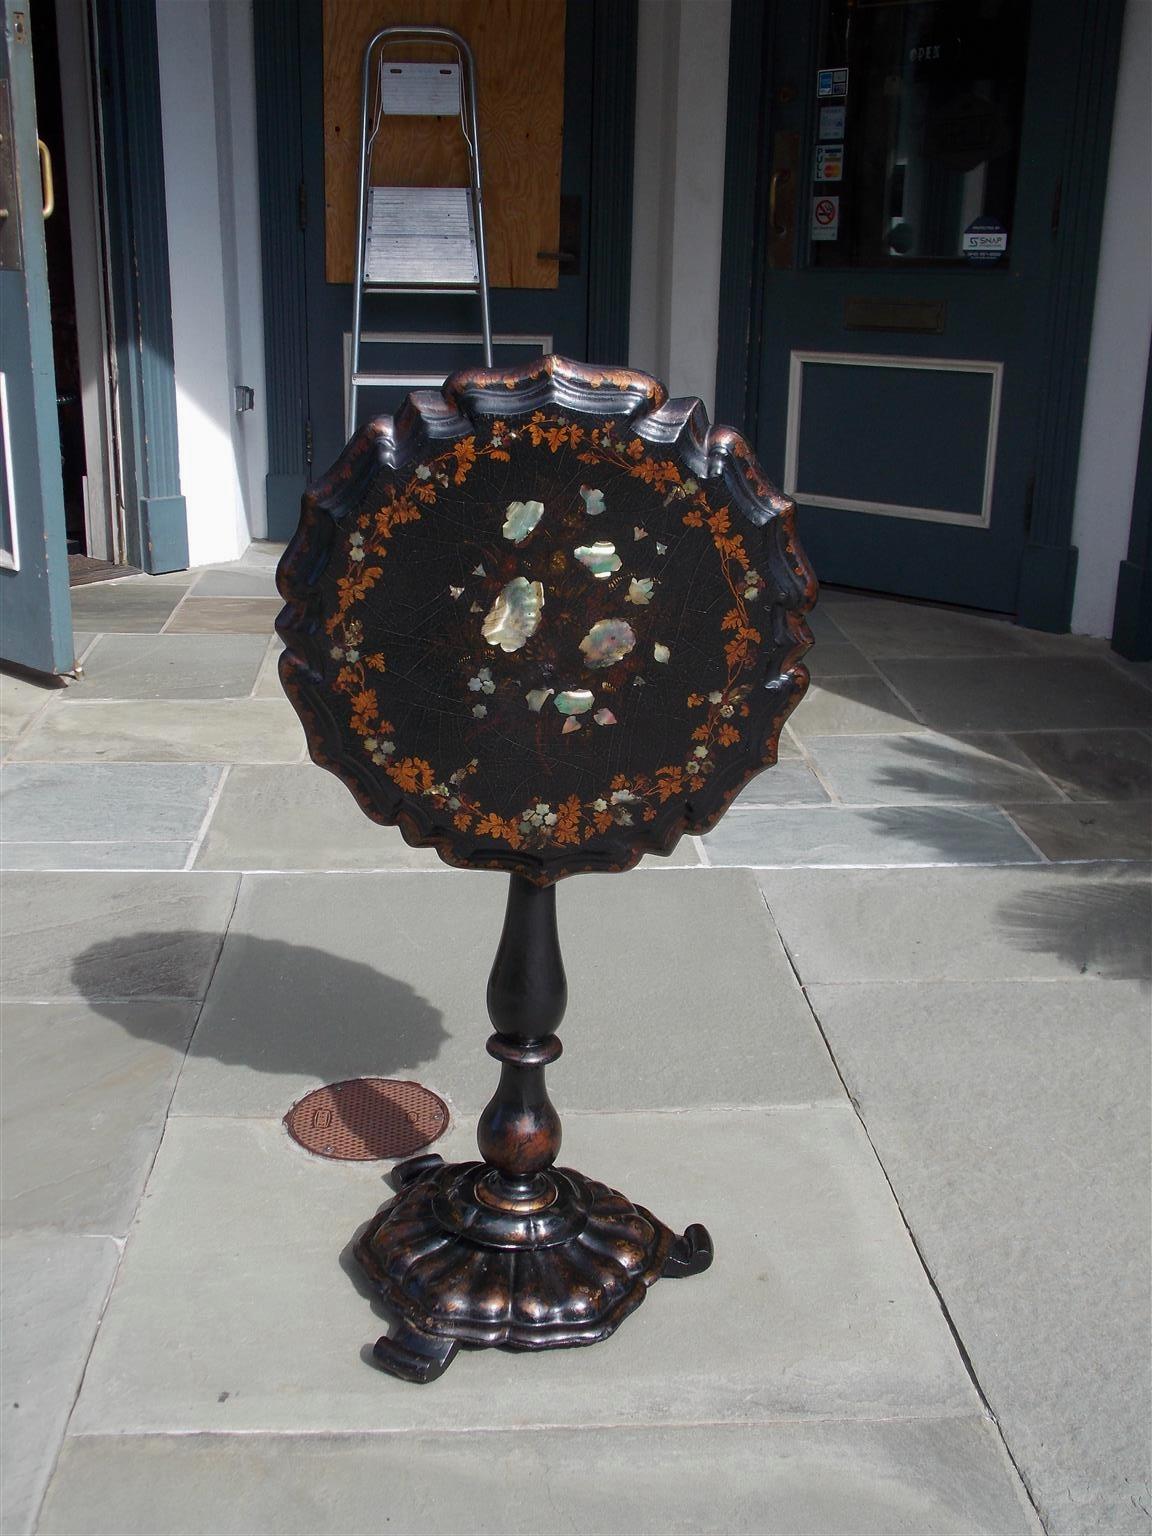 English Regency papier mâché tilt top scalloped edge tea table with gilt stenciled foliage motif, mother of pearl inlays, turned bulbous ringed pedestal, original locking mechanism, and resting on a circular gadrooned base with three scrolled feet.